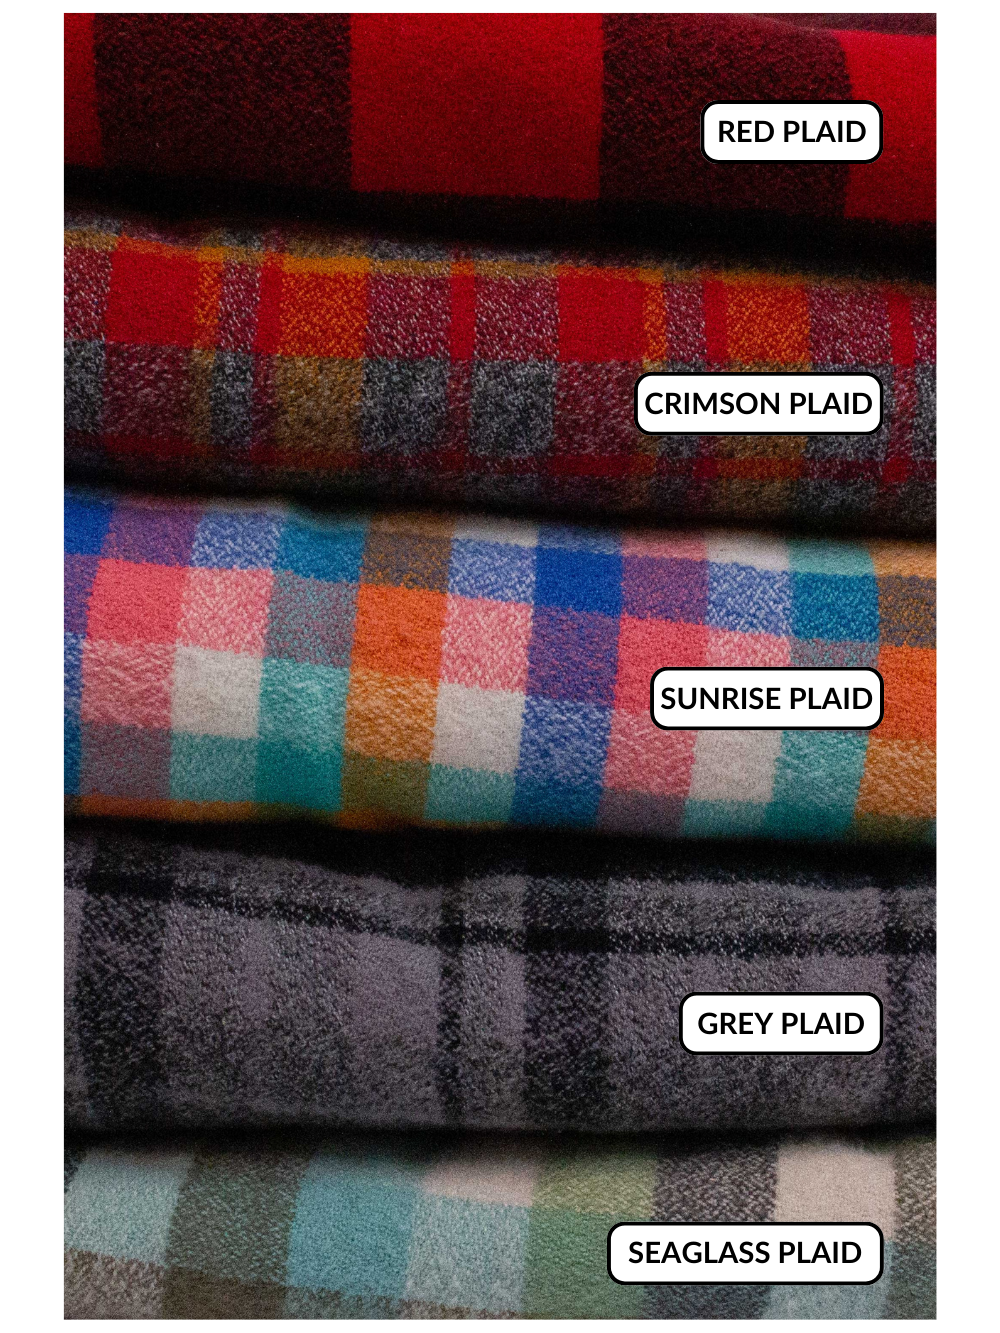 All of the plaid fabrics in a stack: Red plaid: large buffalo plaid in red and black. Crimson plaid: small plaid in shades of red, orange, and grey. Sunrise plaid: small plaid with pinks, oranges, blues, and teal greens. Seaglass plaid: larger plaid with greens, light blue, and grey. Grey plaid: small plaid with greys and black. 